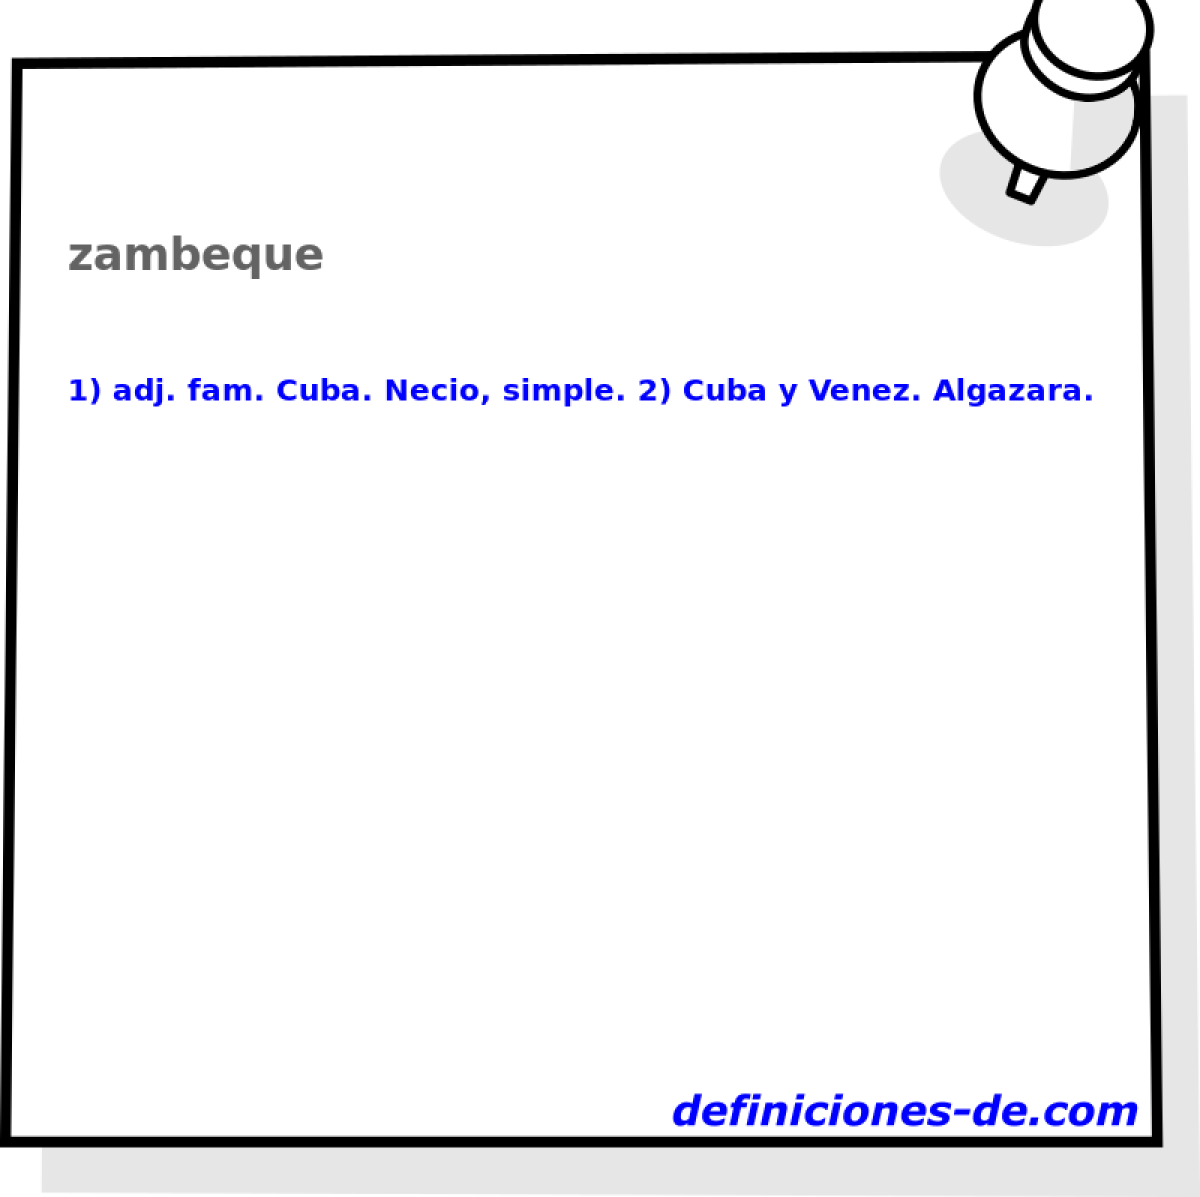 zambeque 